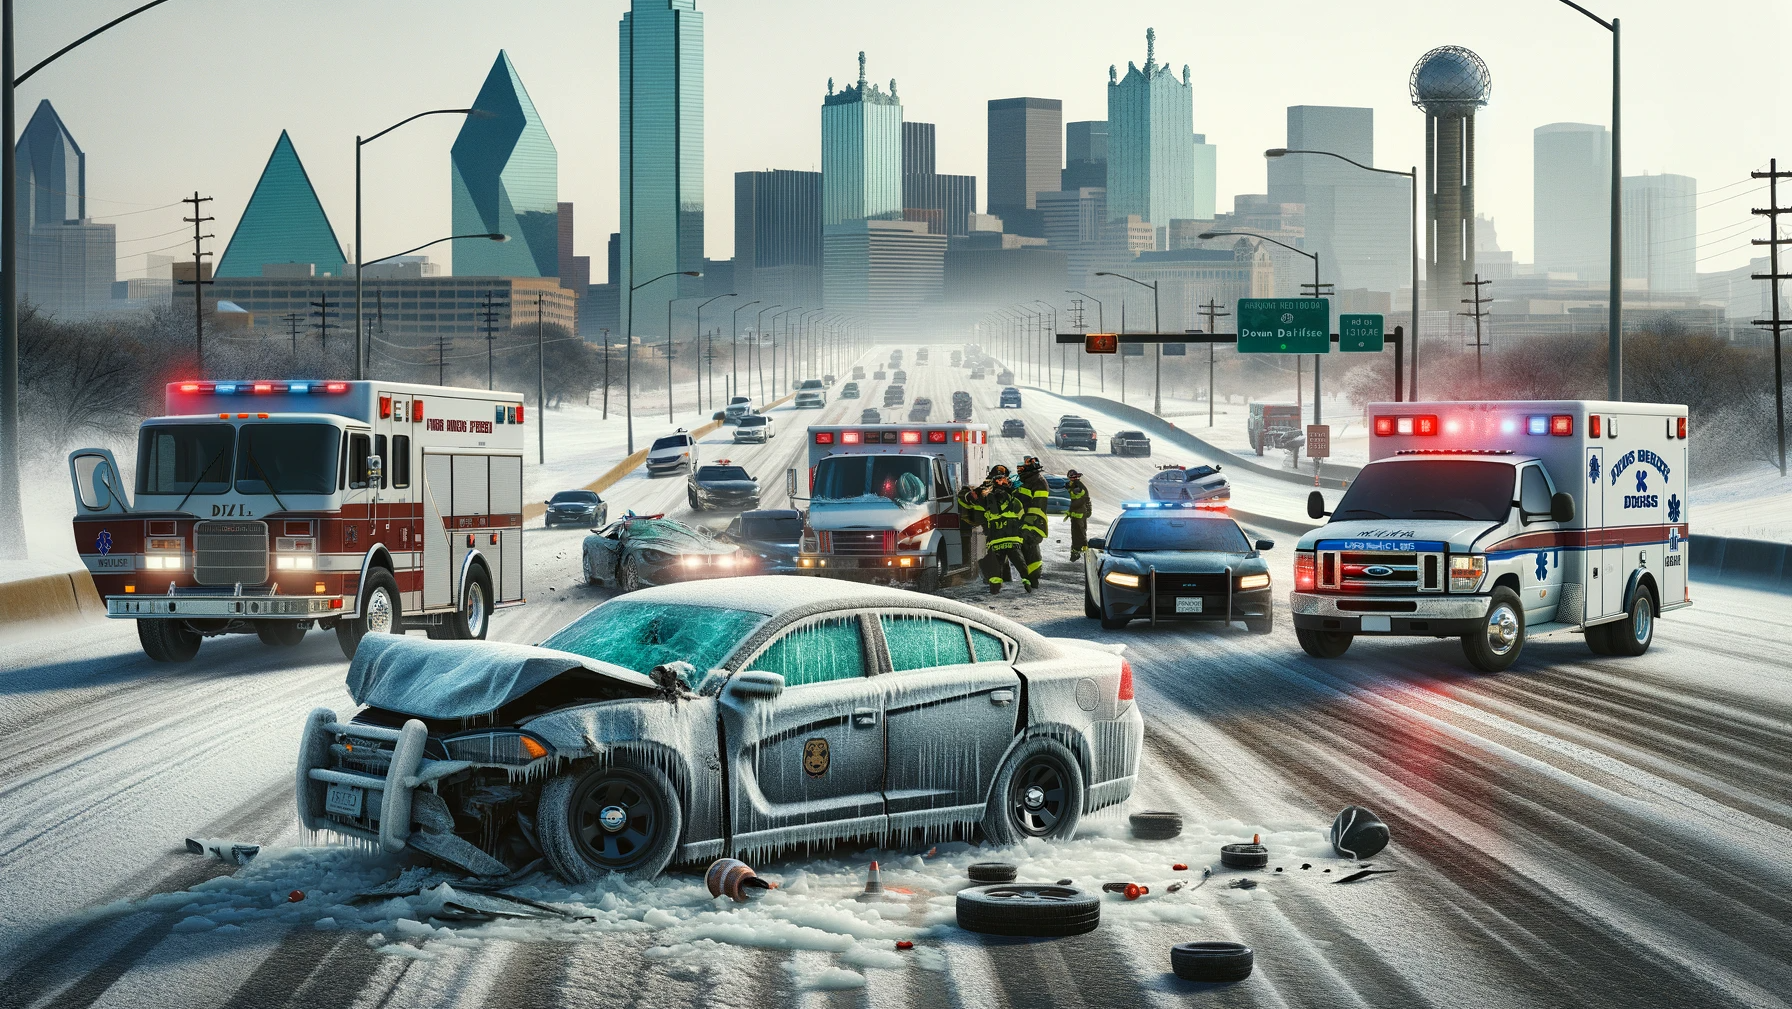 Car accident on an icy road near downtown Dallas